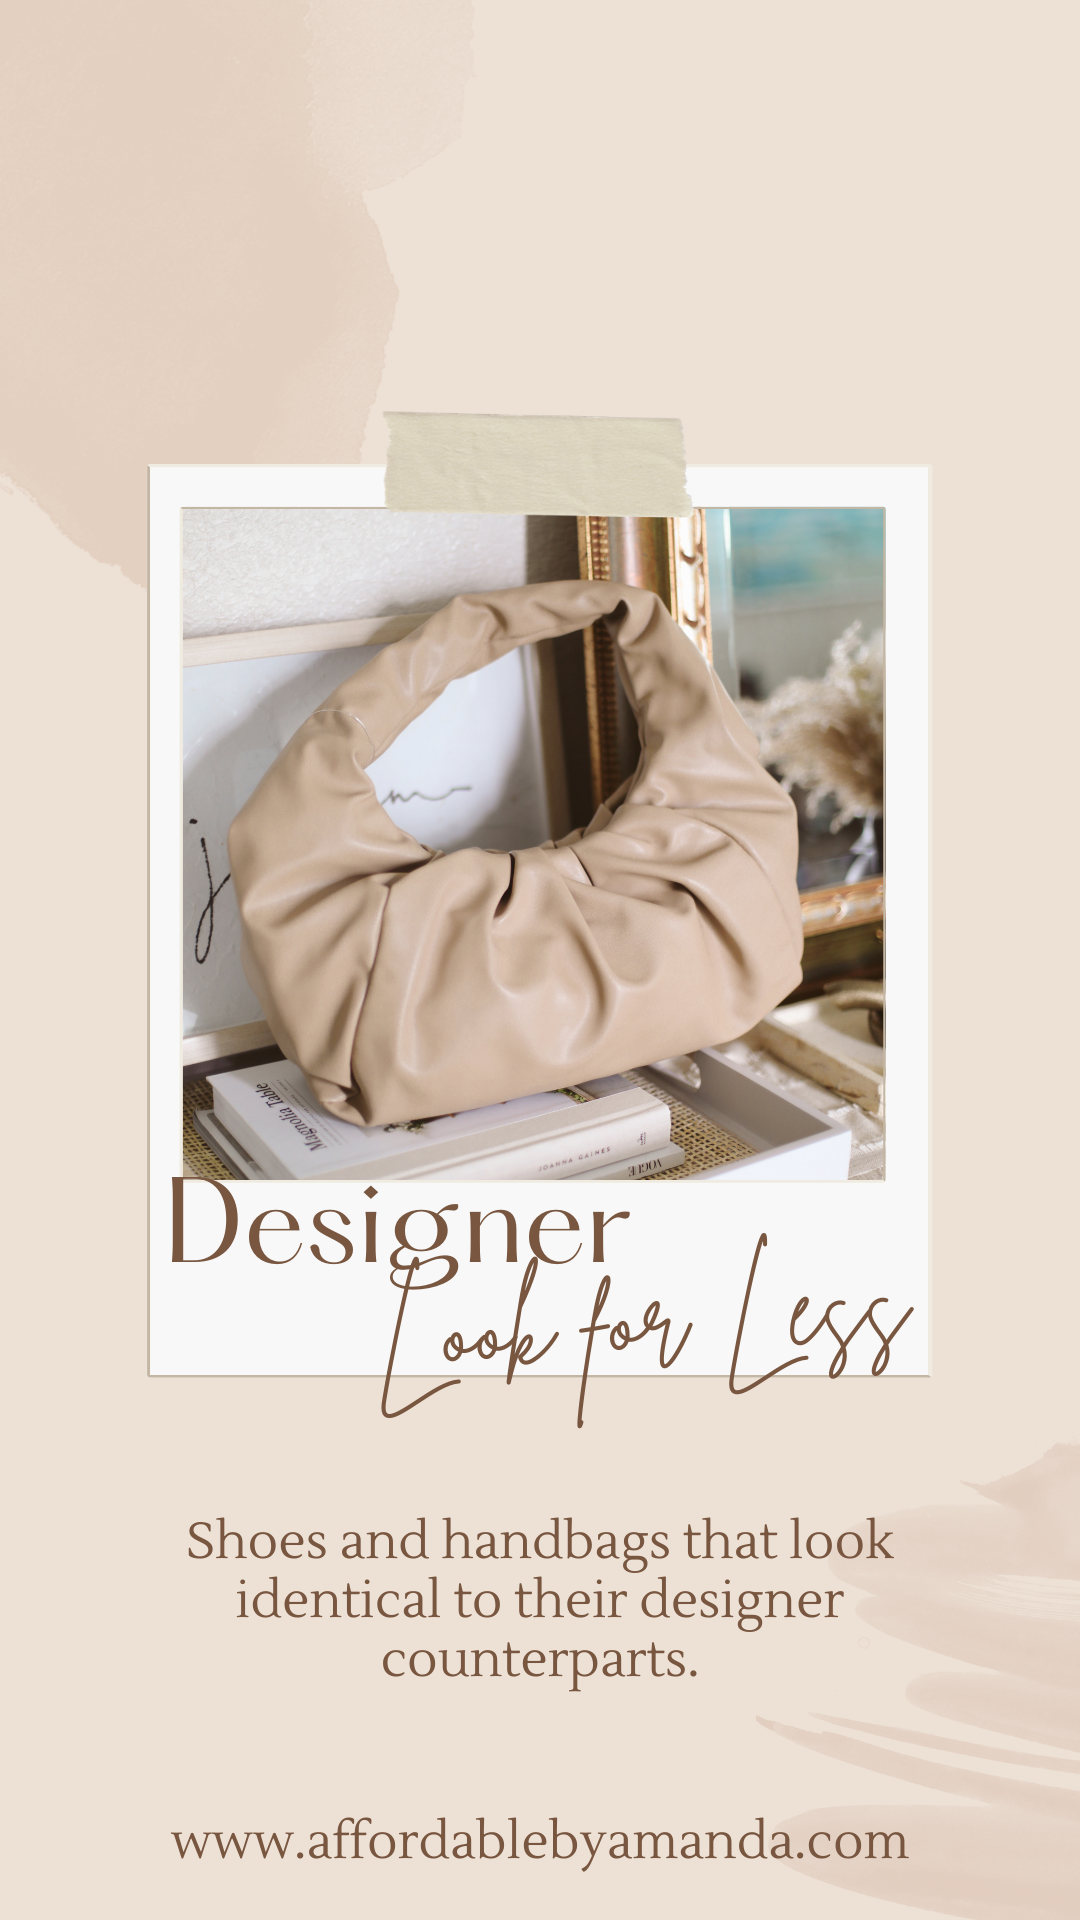 Designer Look for Less | Affordable by Amanda